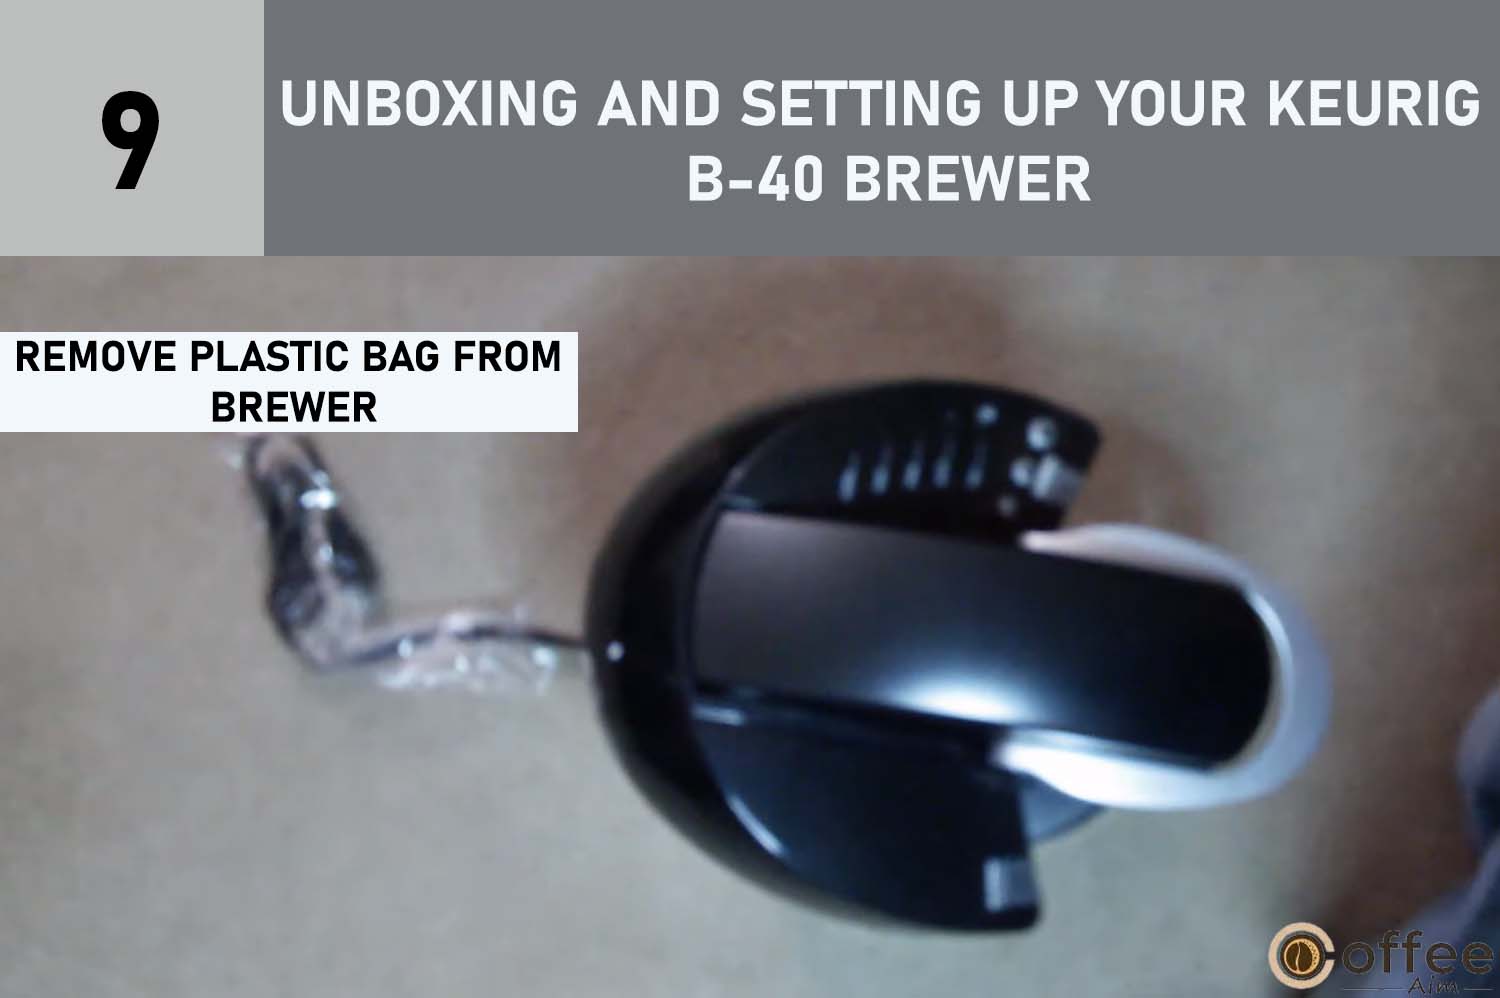 Illustrated in the image is the crucial step of removing the plastic bag from your Keurig B-40 Brewer, an integral part of the process as you unbox and set up your machine. This step is outlined comprehensively in our article titled "How to Use Keurig B-40